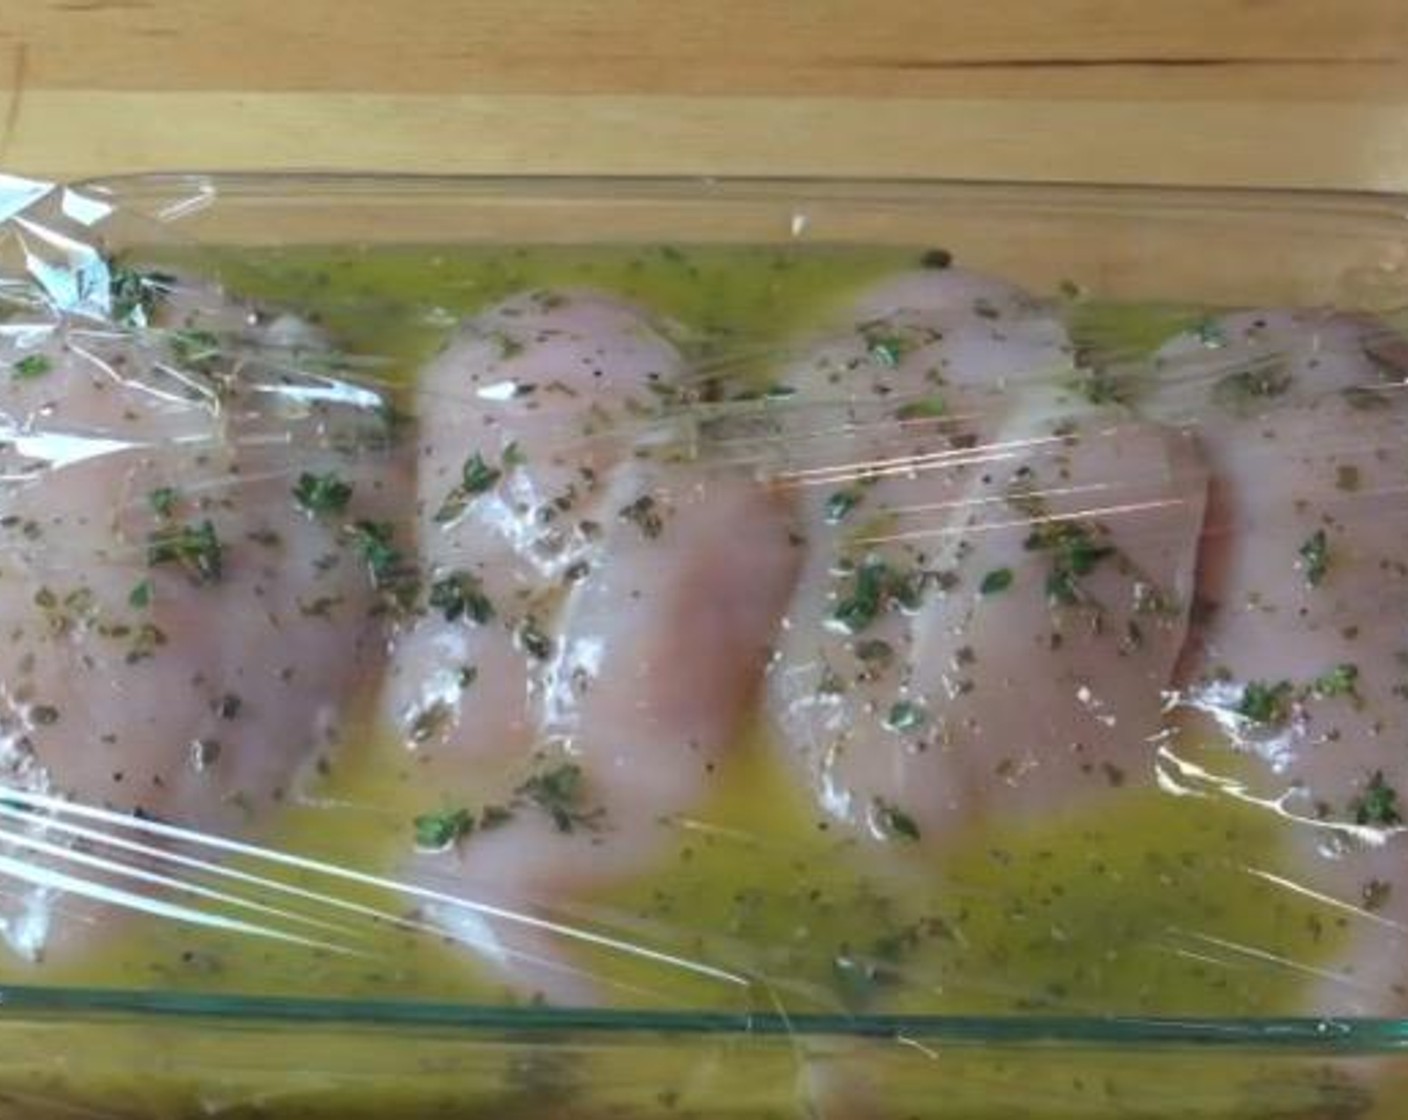 step 2 In a baking dish, add Chicken Breasts (4). Pour the marinade over the chicken. Cover dish in plastic wrap and place in fridge for 3 hours, turning occasionally.